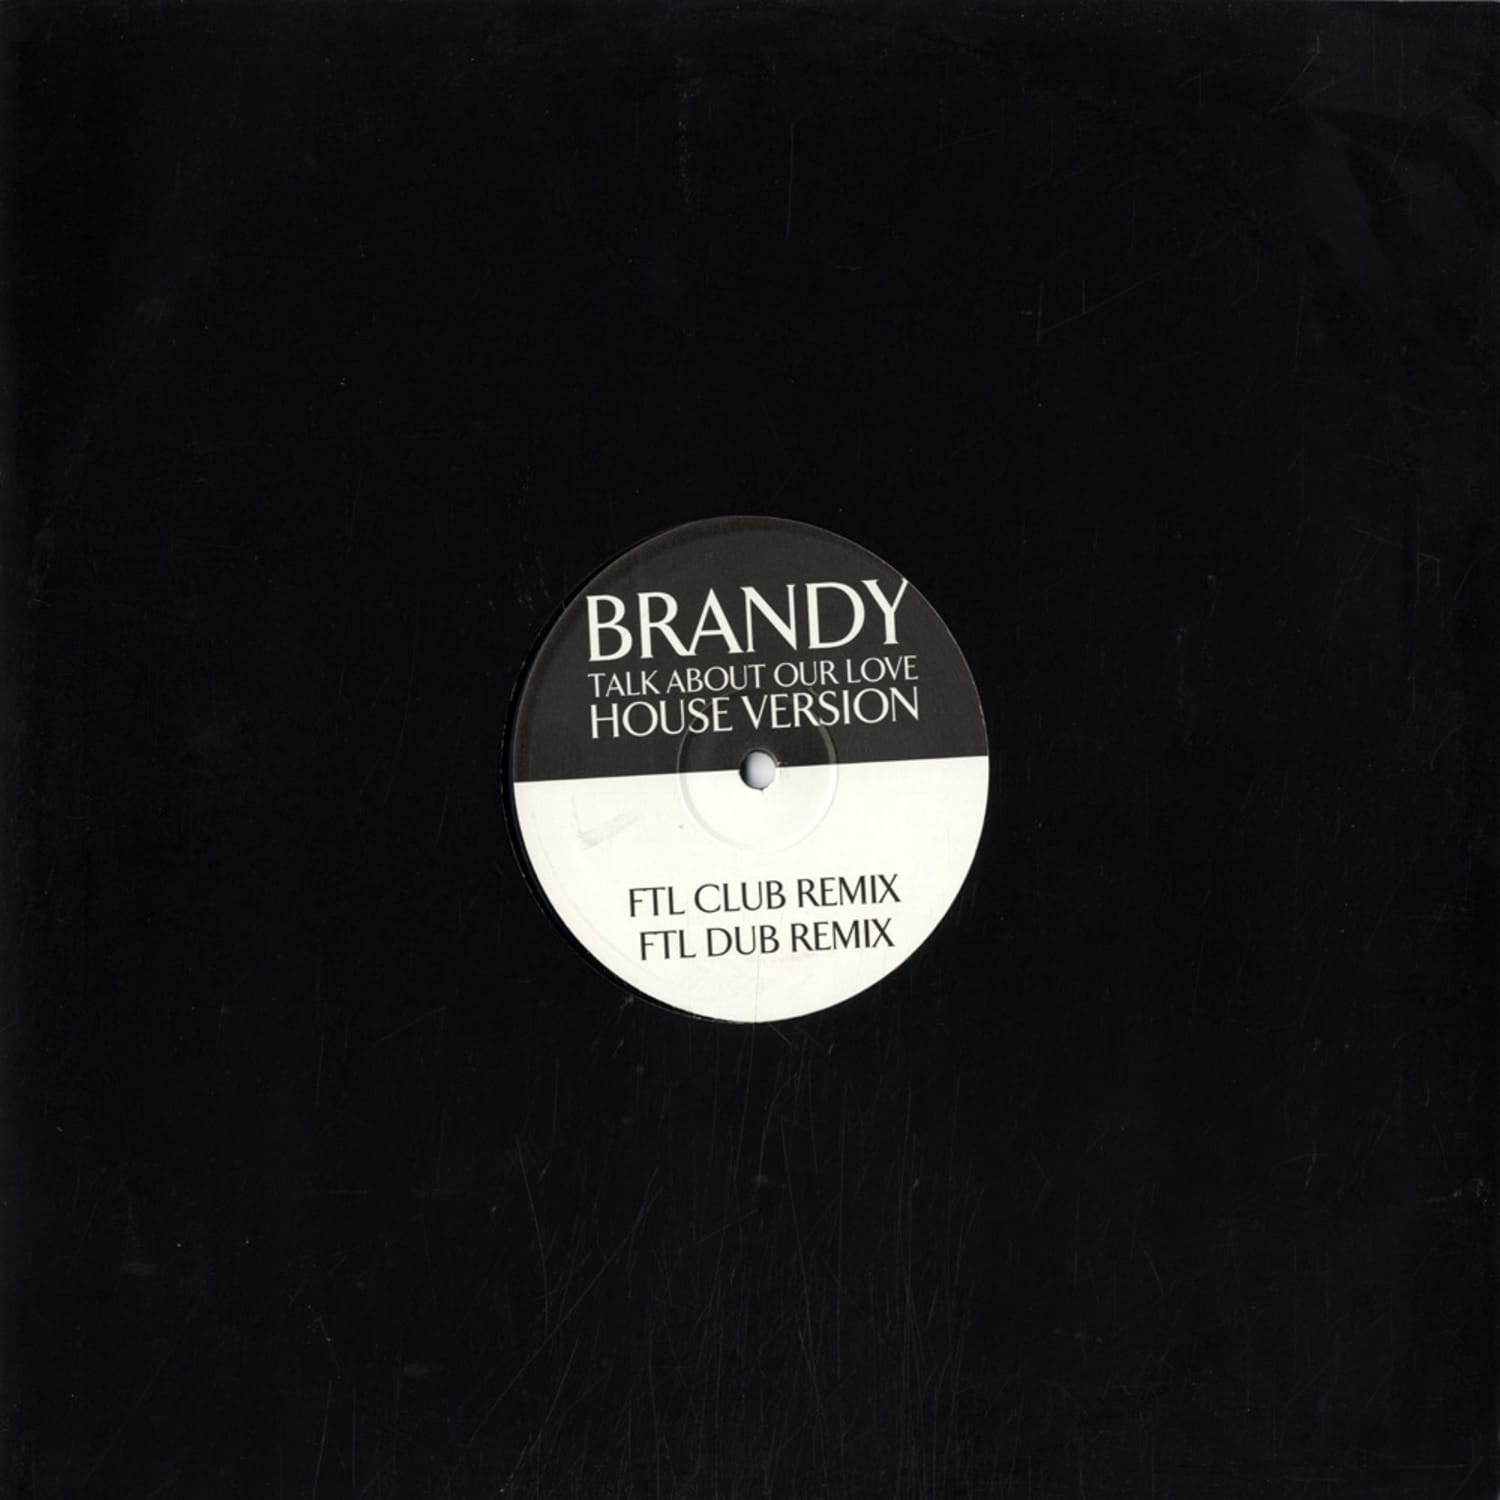 Brandy - TALK ABOUT OUR LOVE 